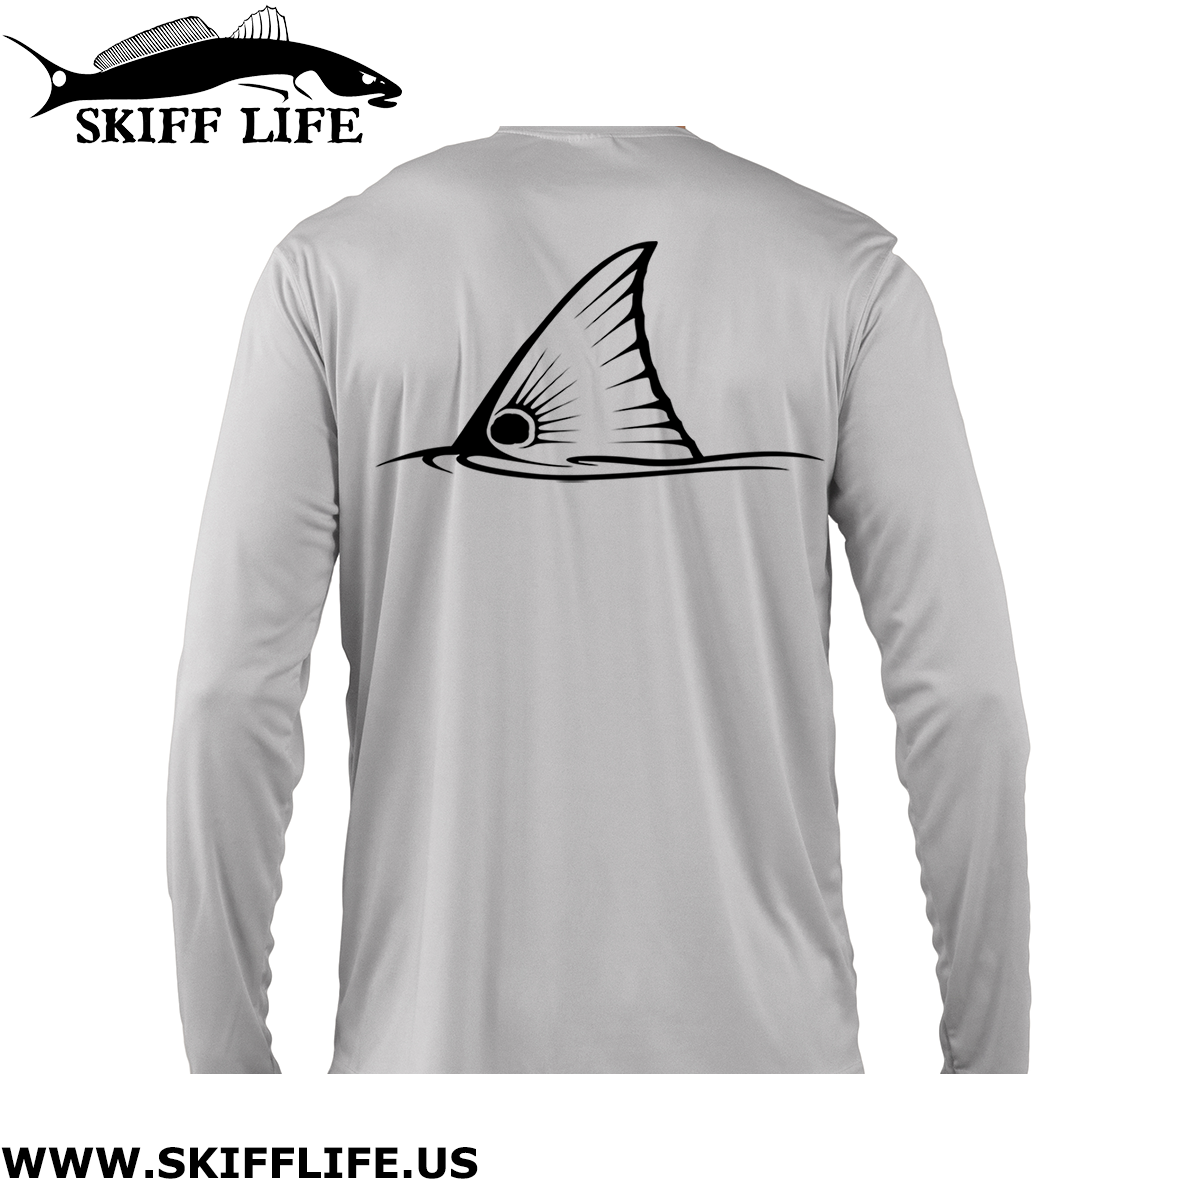 Kids Fishing Shirts Snook Florida State Flag Custom Sleeve Youth-XS-4-6 / Seagrass